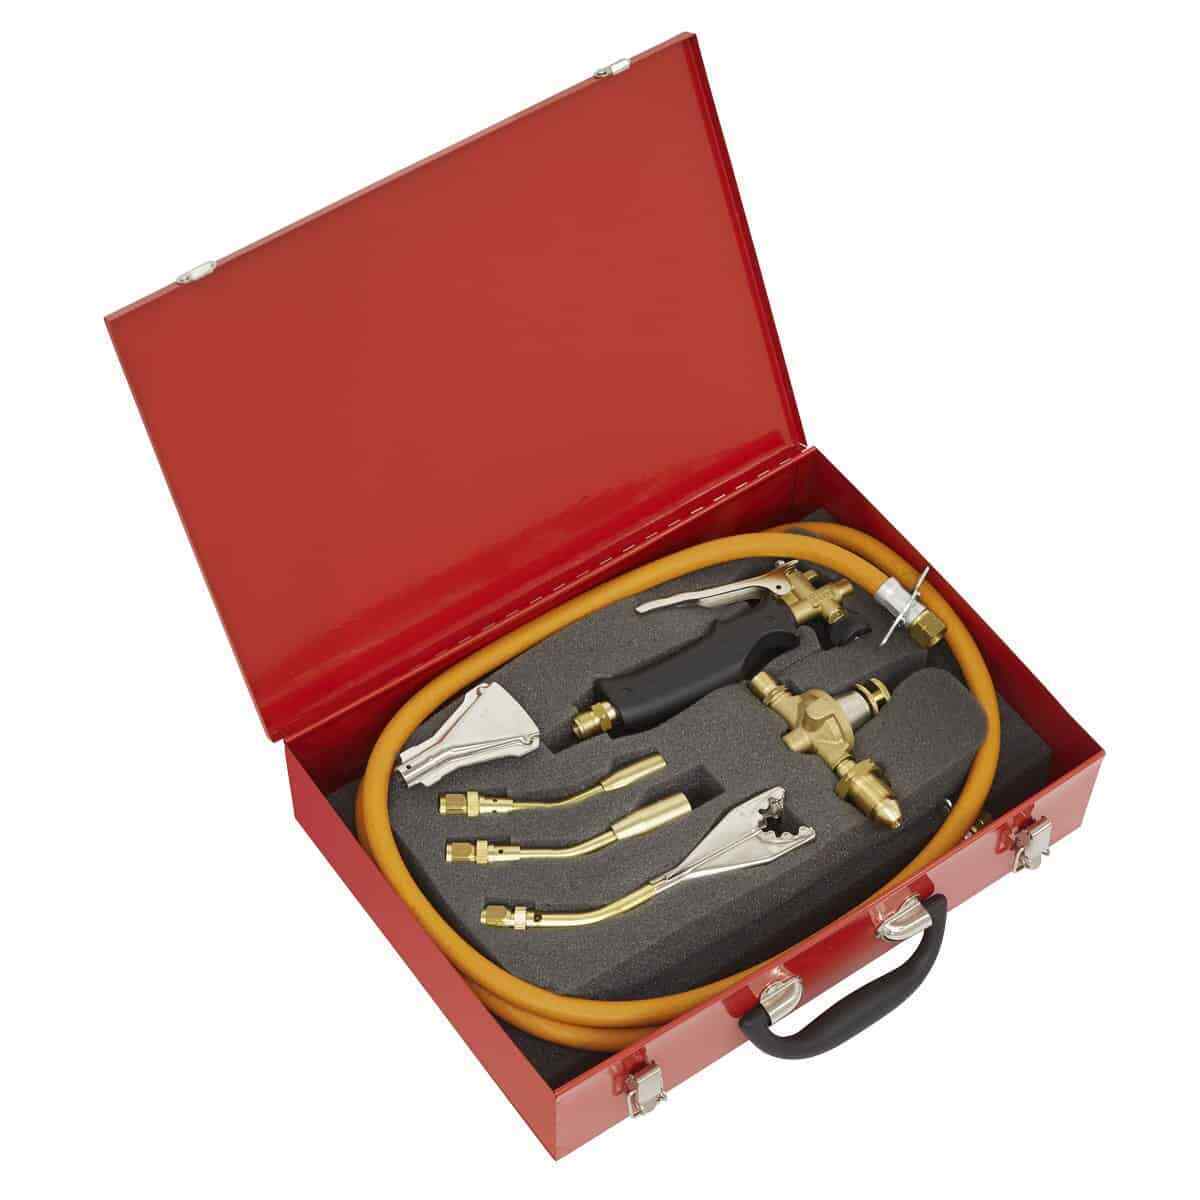 Sealey LPT14 Propane Torch Kit 14pc, Torch, Hose and Nozzles